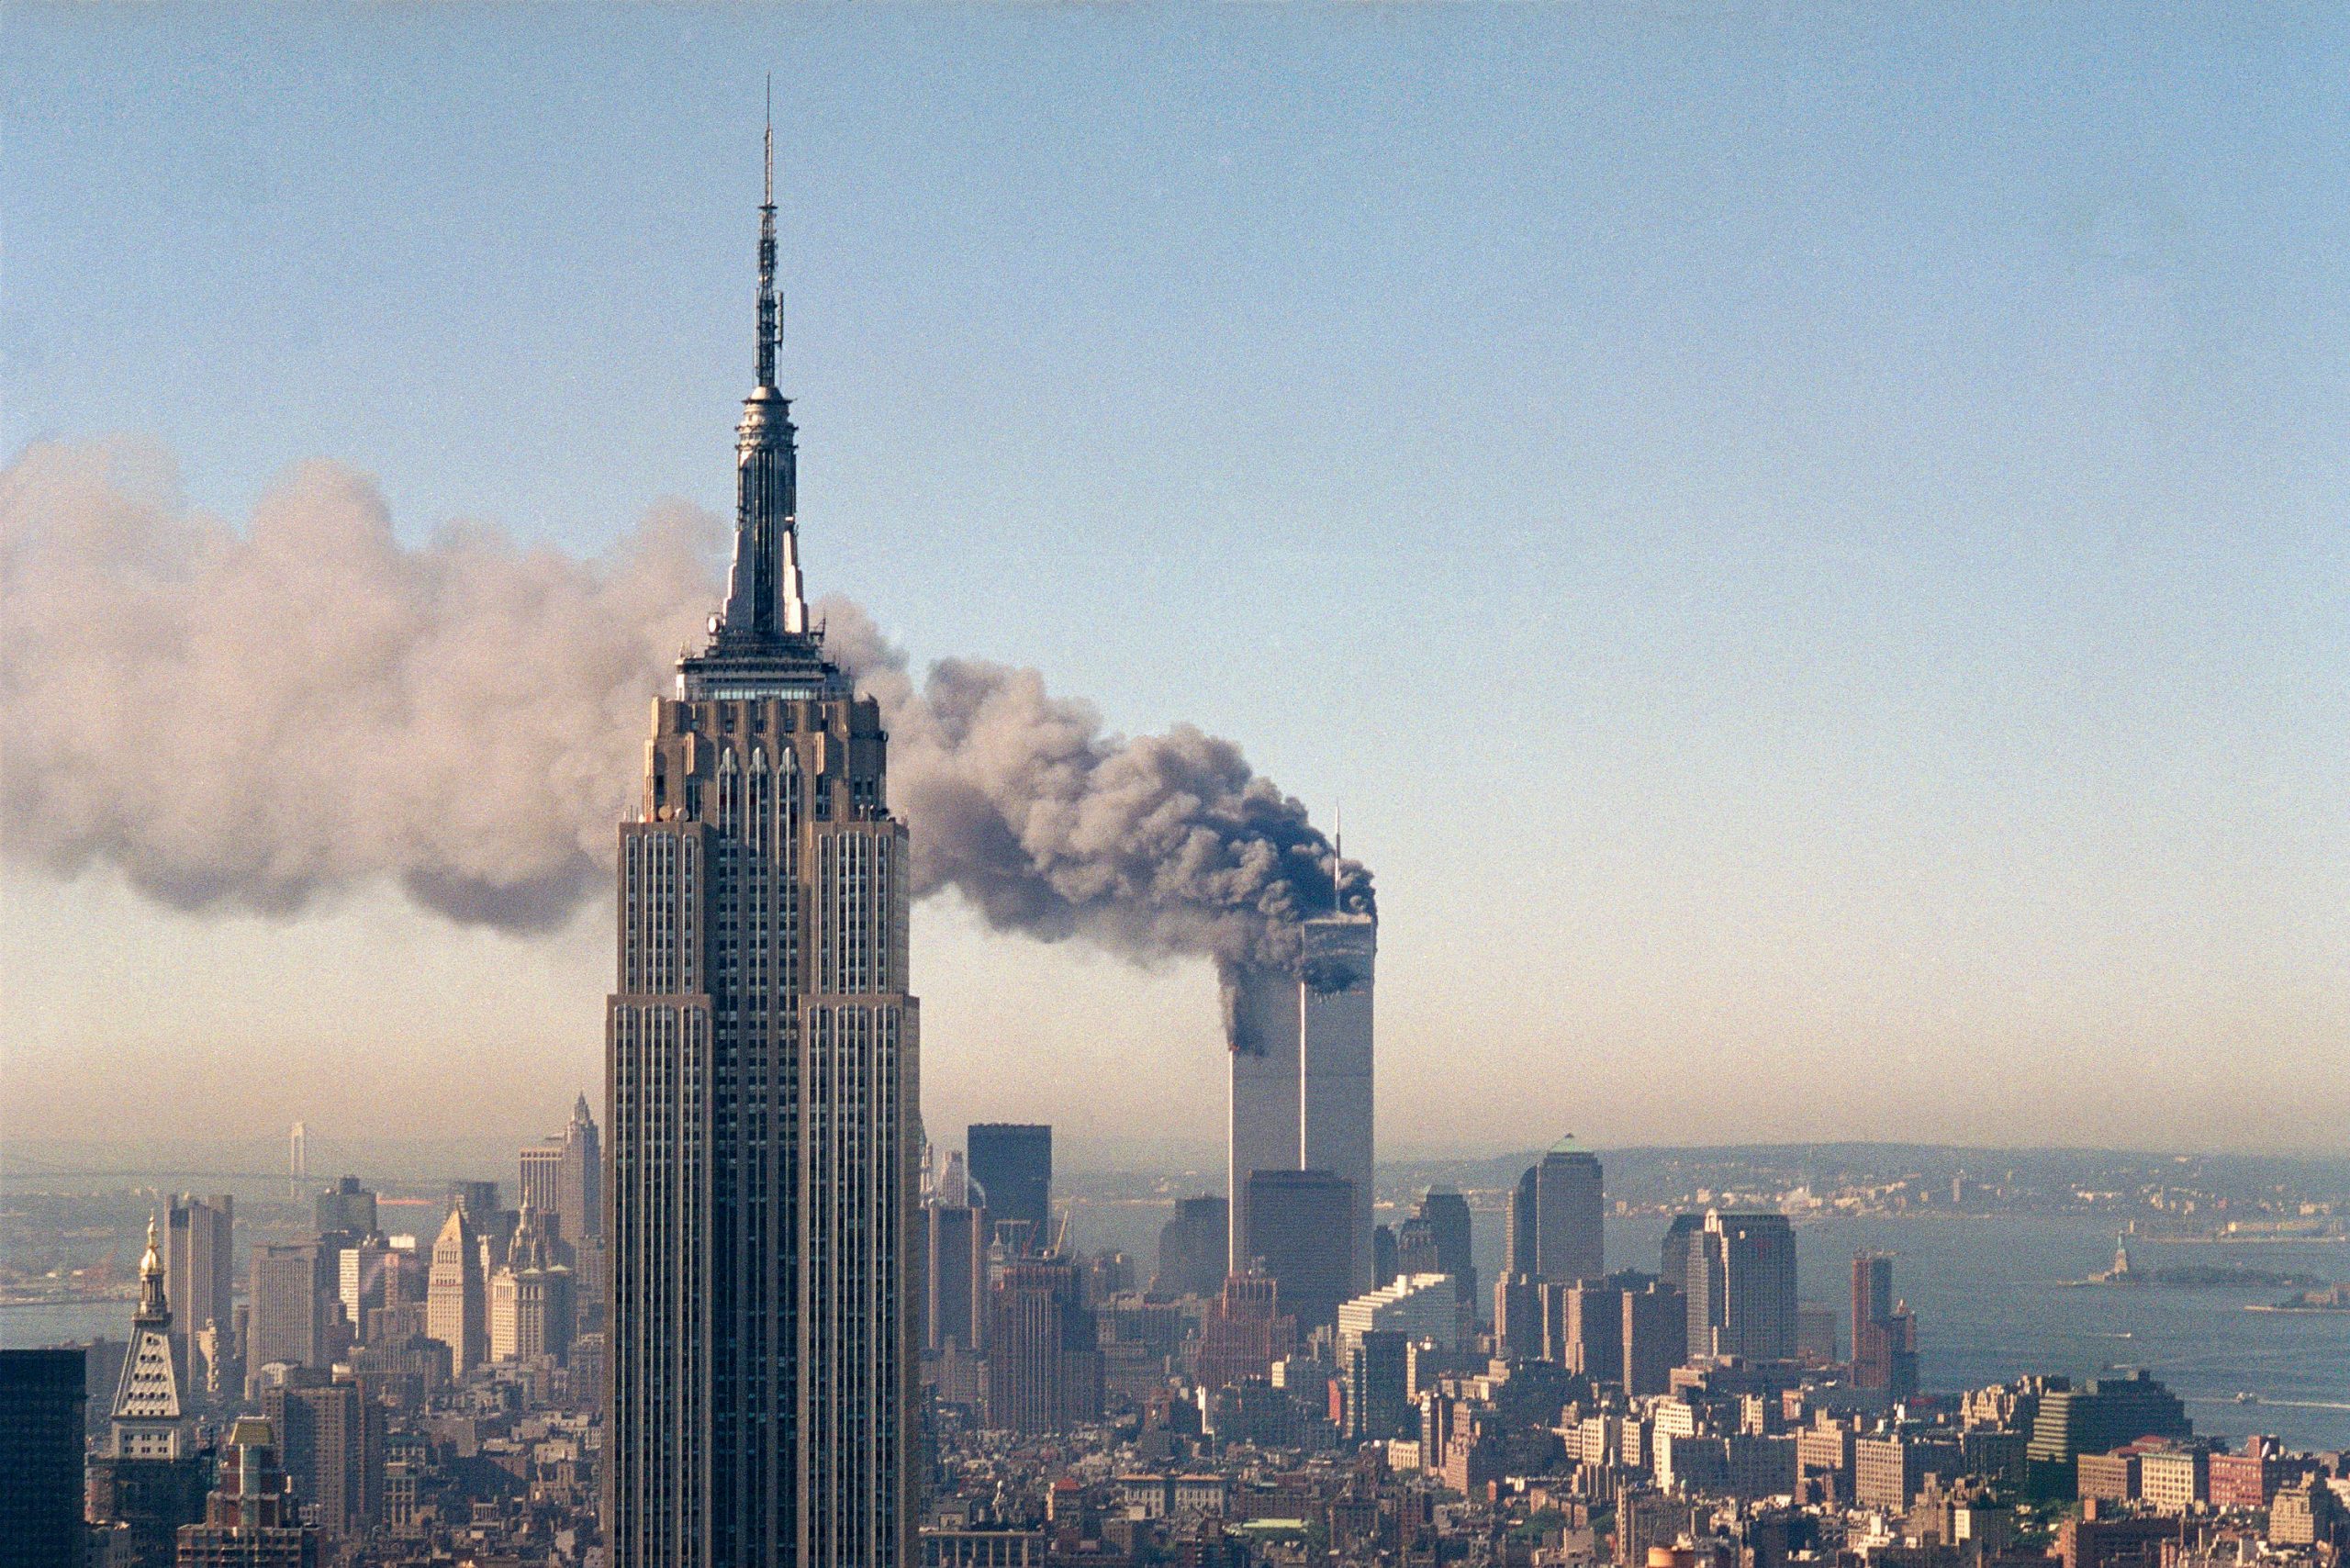 Will never forget the trauma: People recall where they were when 9/11 attacks unfolded